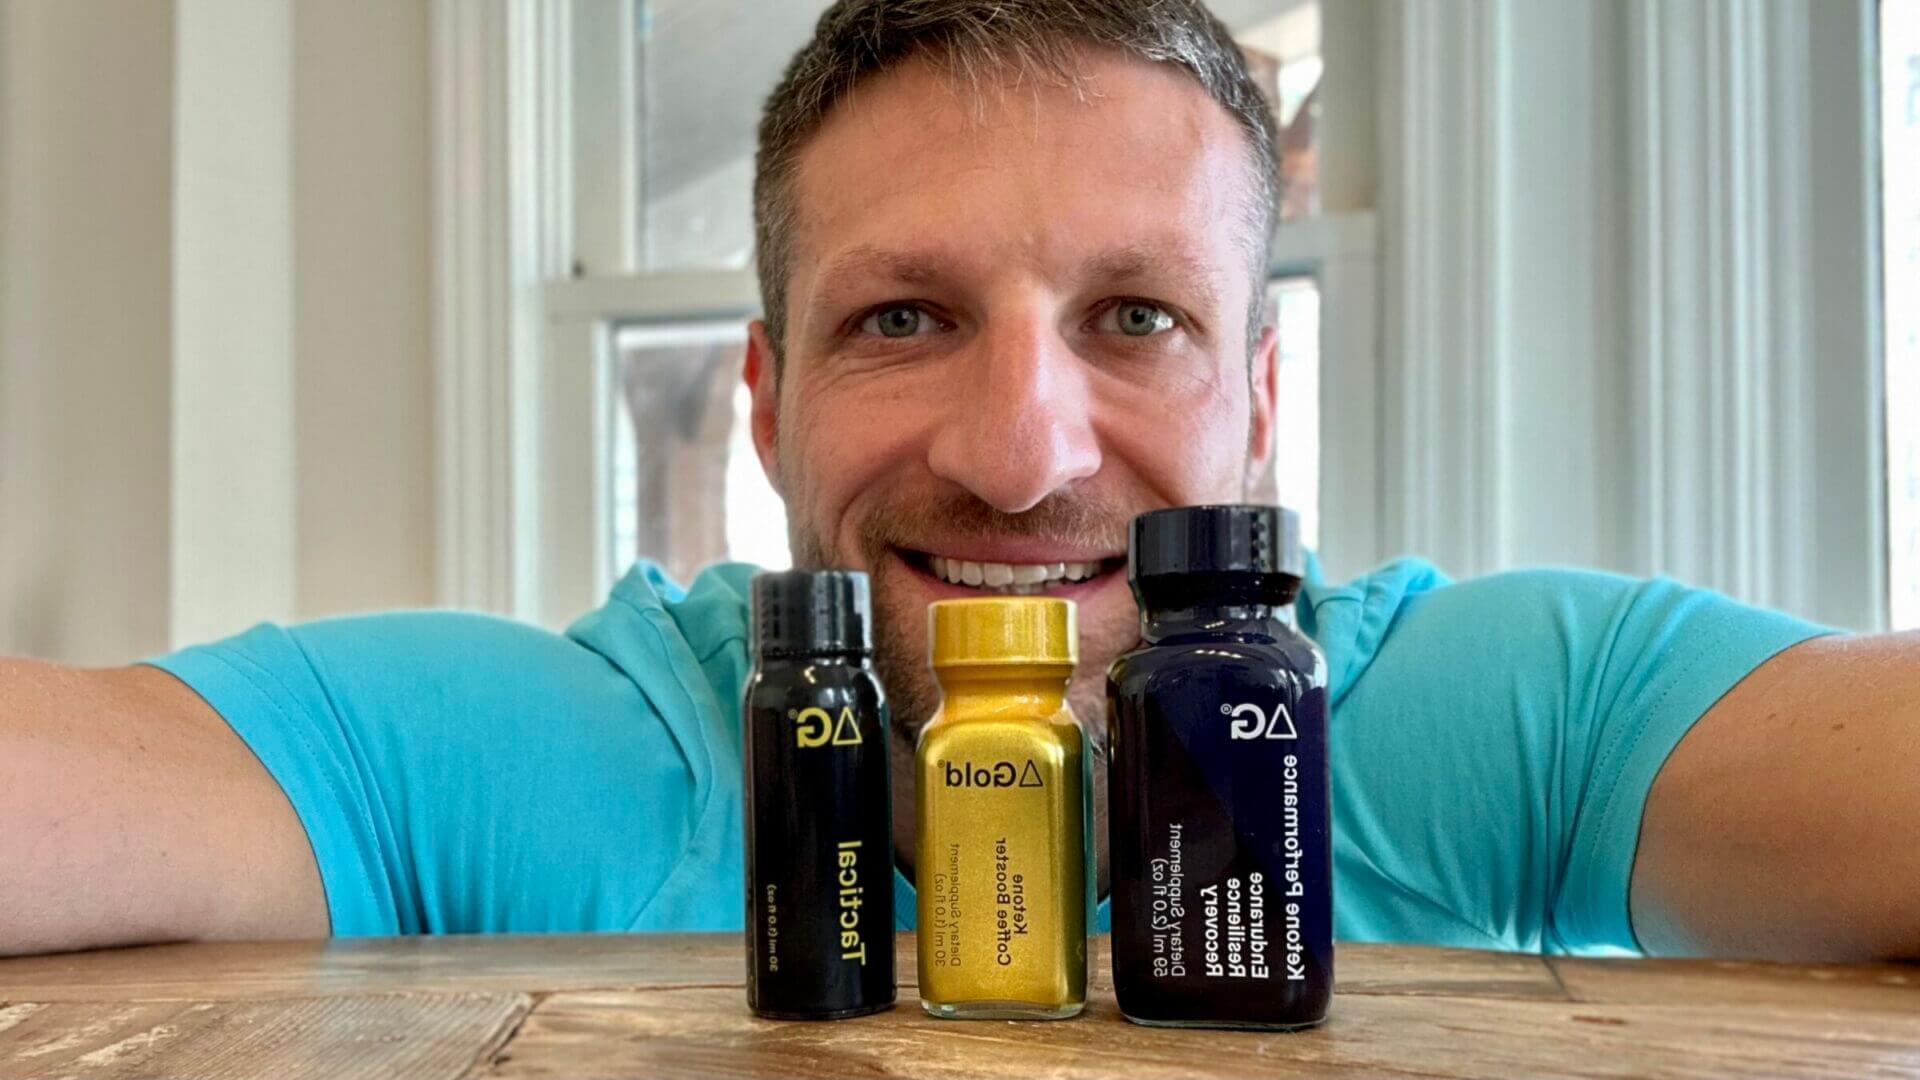 I've been using DeltaG ketones to improve my athletic and cognitive performance